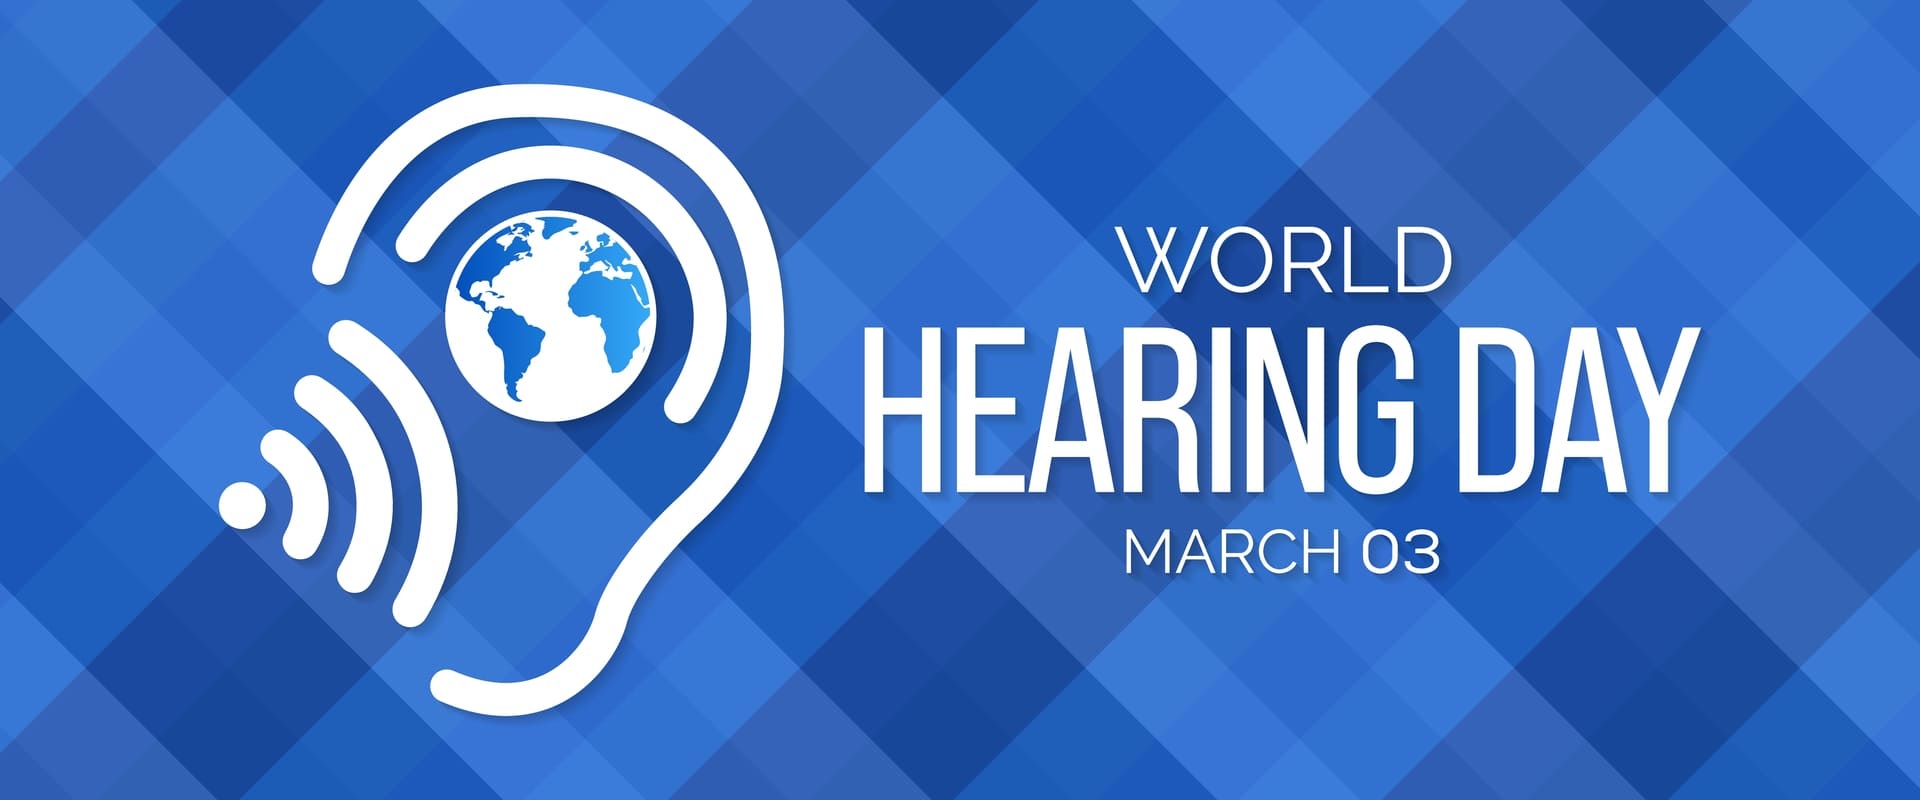 WORLD HEARING DAY IN TAMIL